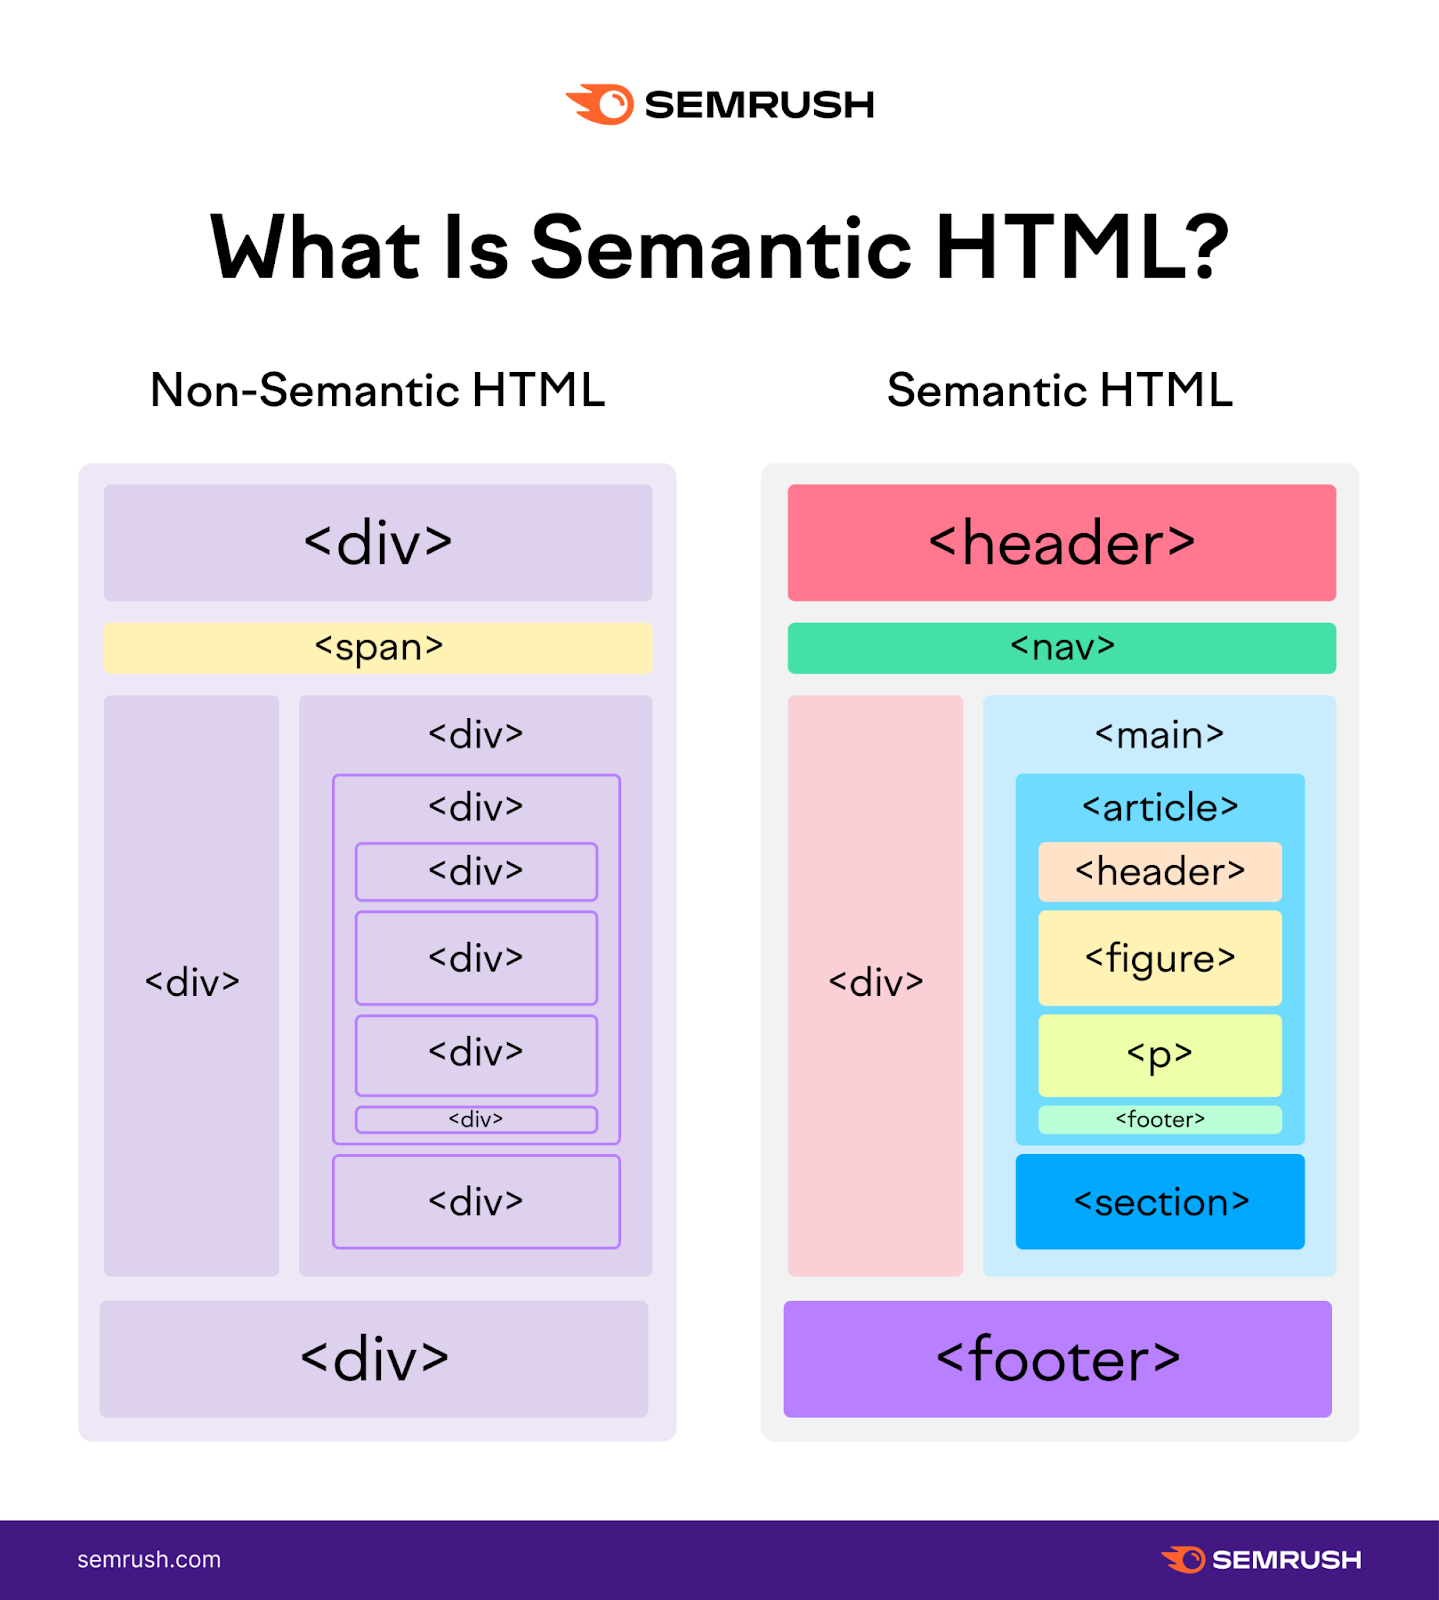 Non-semantic HTML using div tags while semantic HTML uses name tags such as header, nav, footer, etc.